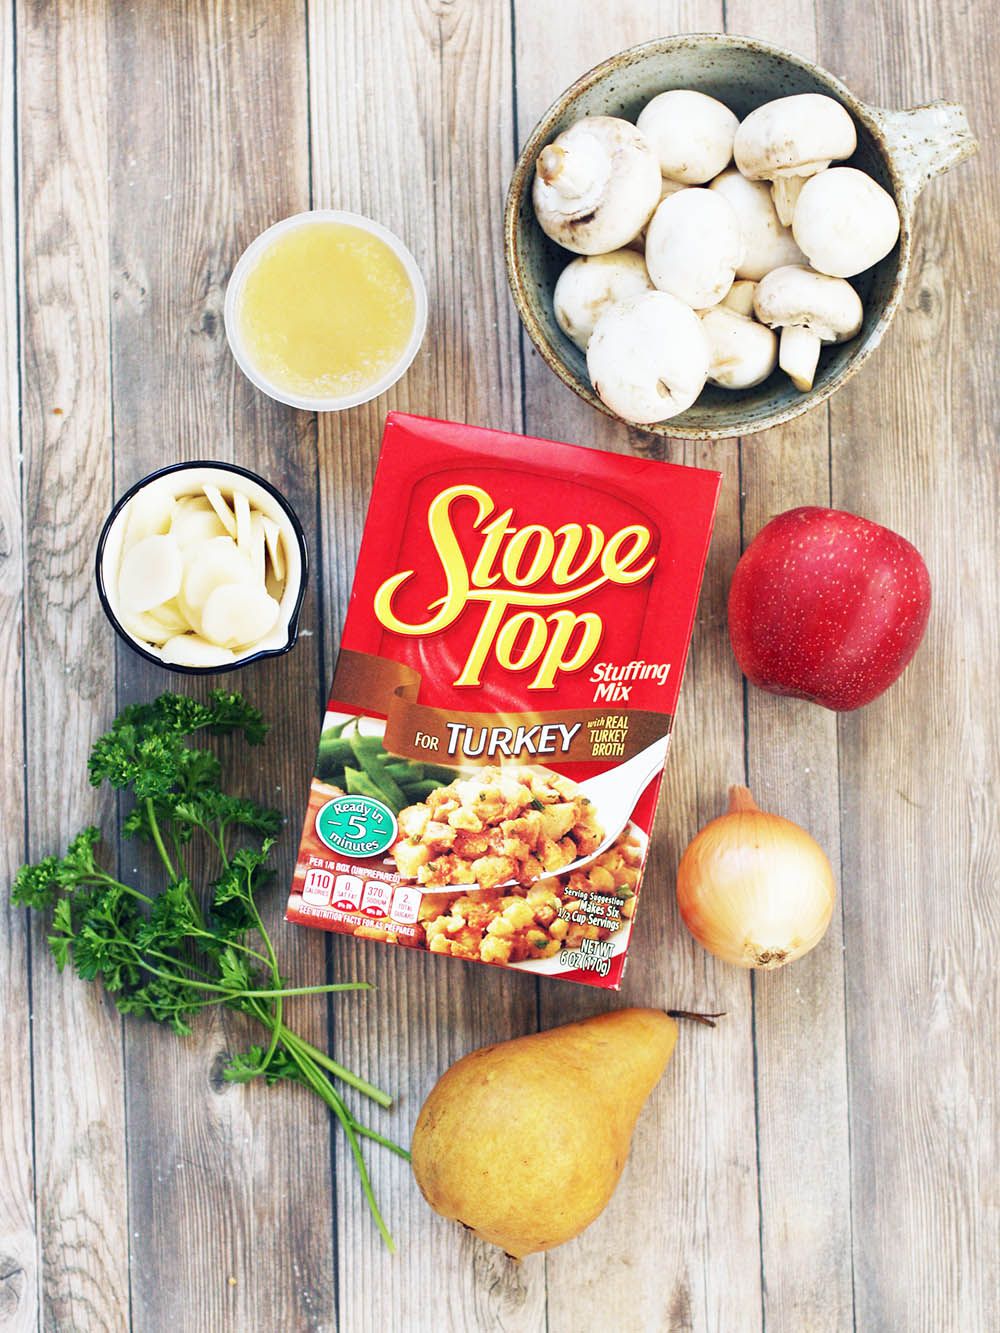 How to doctor up boxed stuffing: A few simple tweaks can take boxed stuffing from boring to extraordinary!